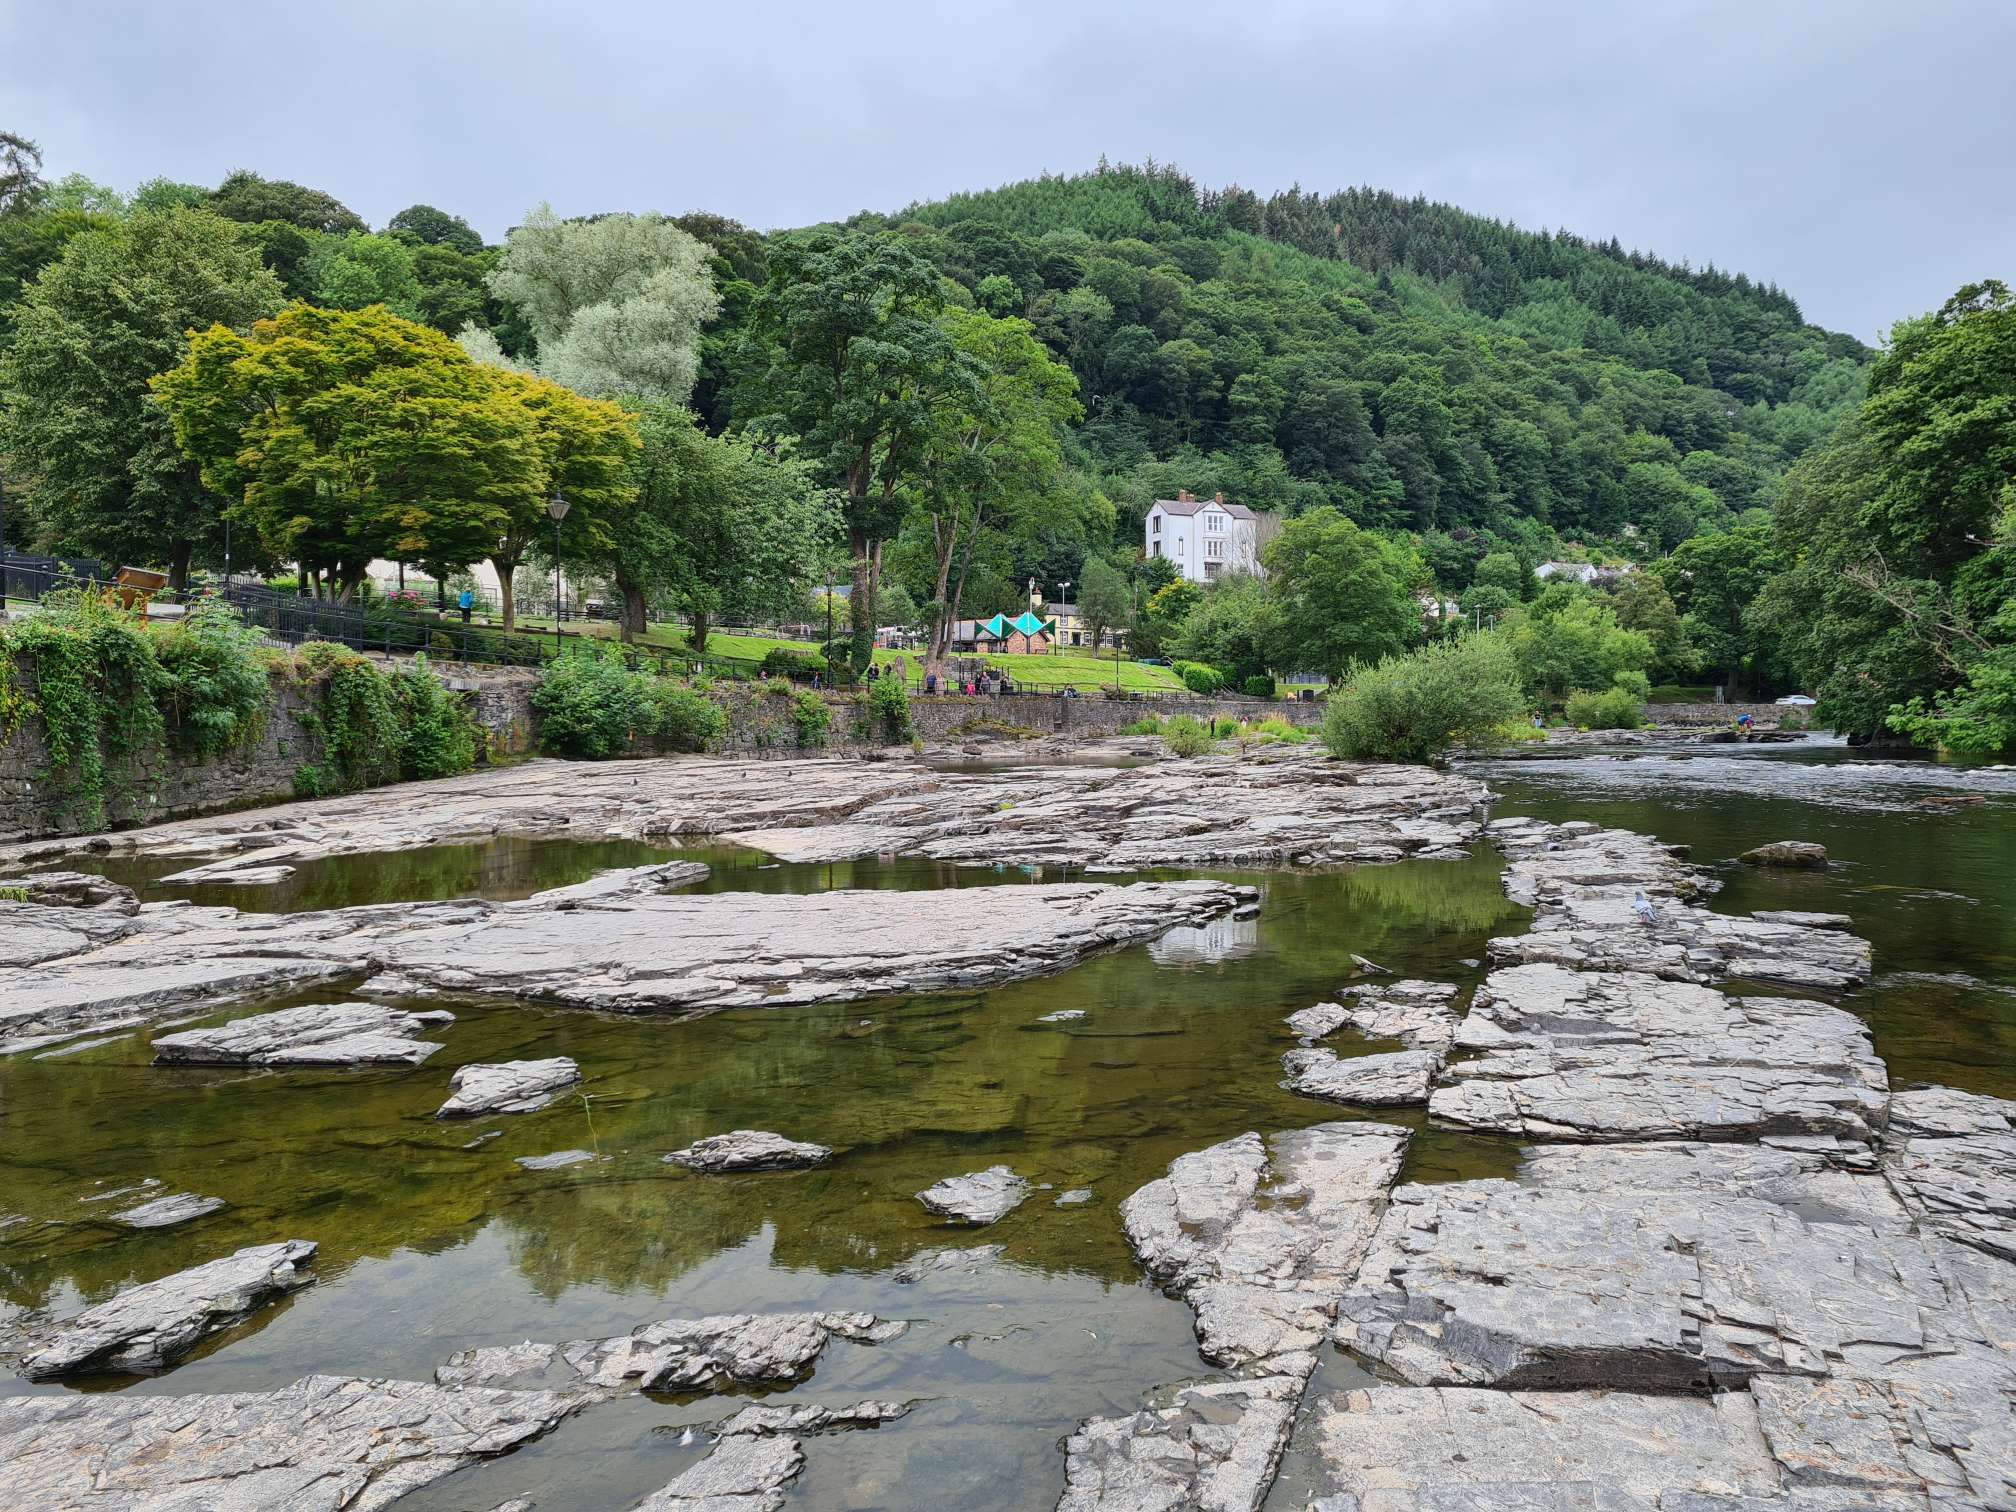 A picture of the River Dee as it passes through Llangollen